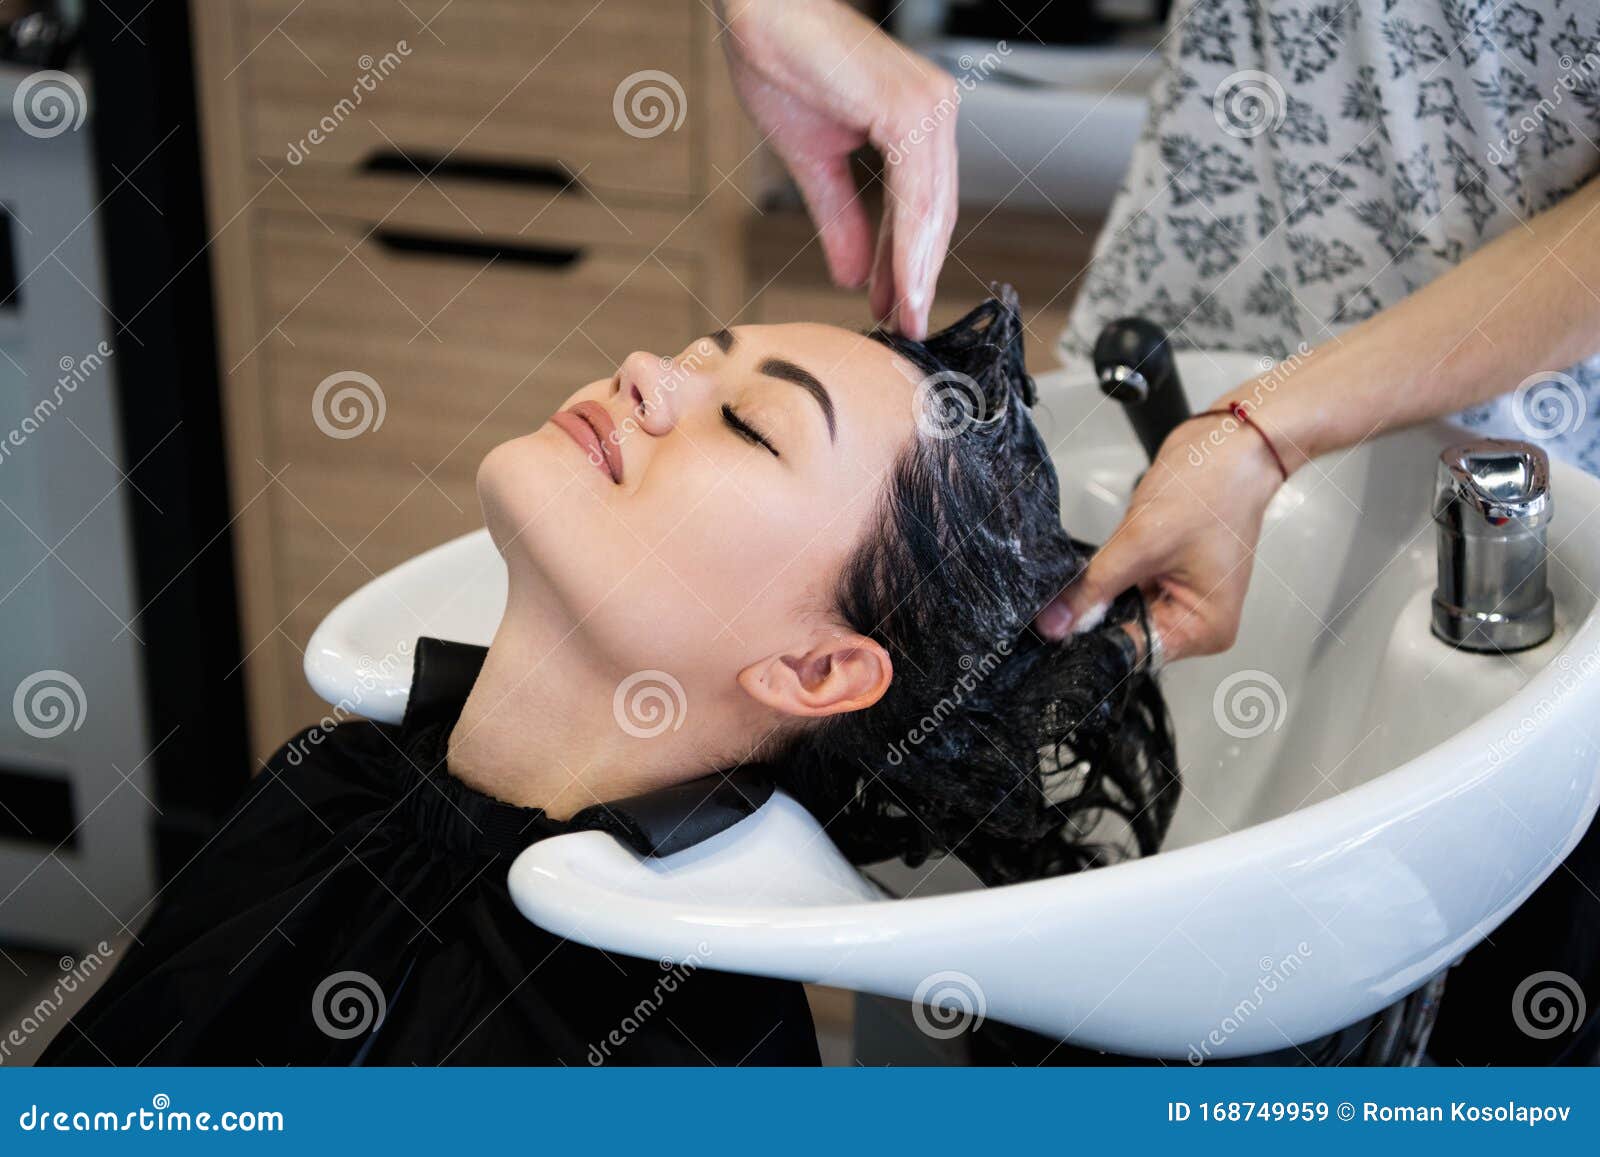 Woman getting hair wash done at salon  Jacob Lund Photography Store  premium stock photo